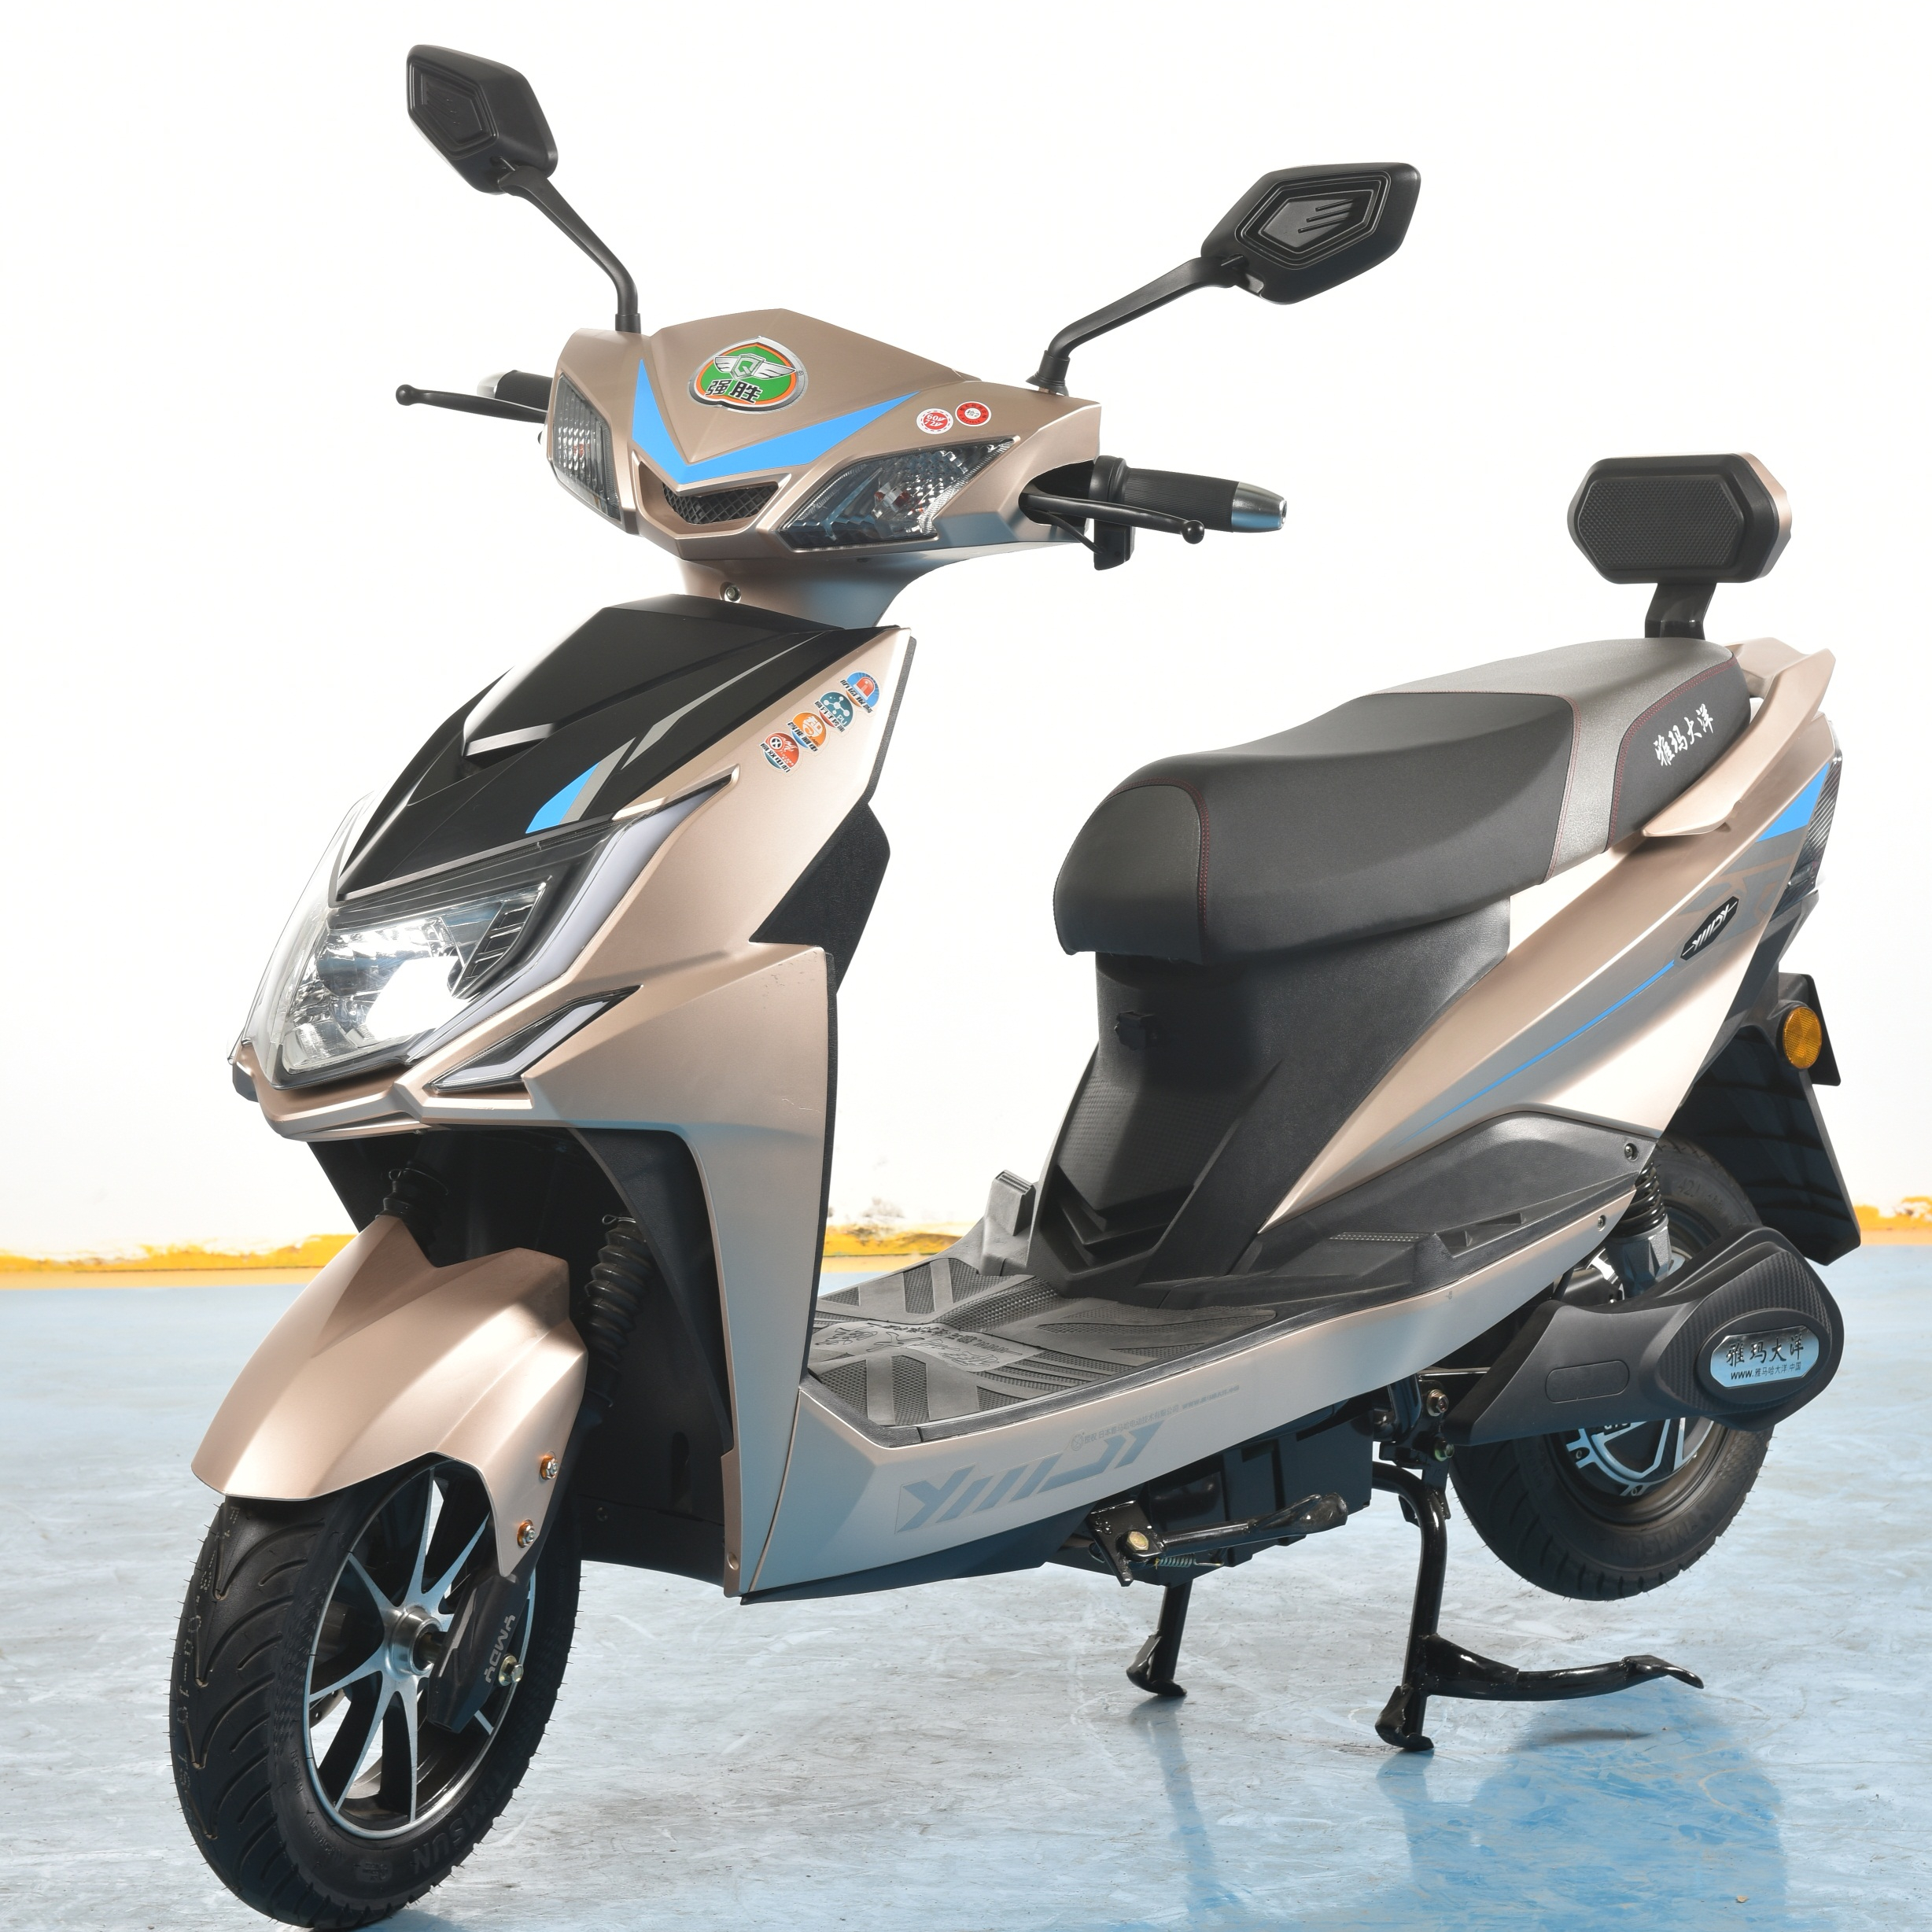 Bajaj auto pulsar motorcycle two wheels electric scooters vehicle manufacturer best price